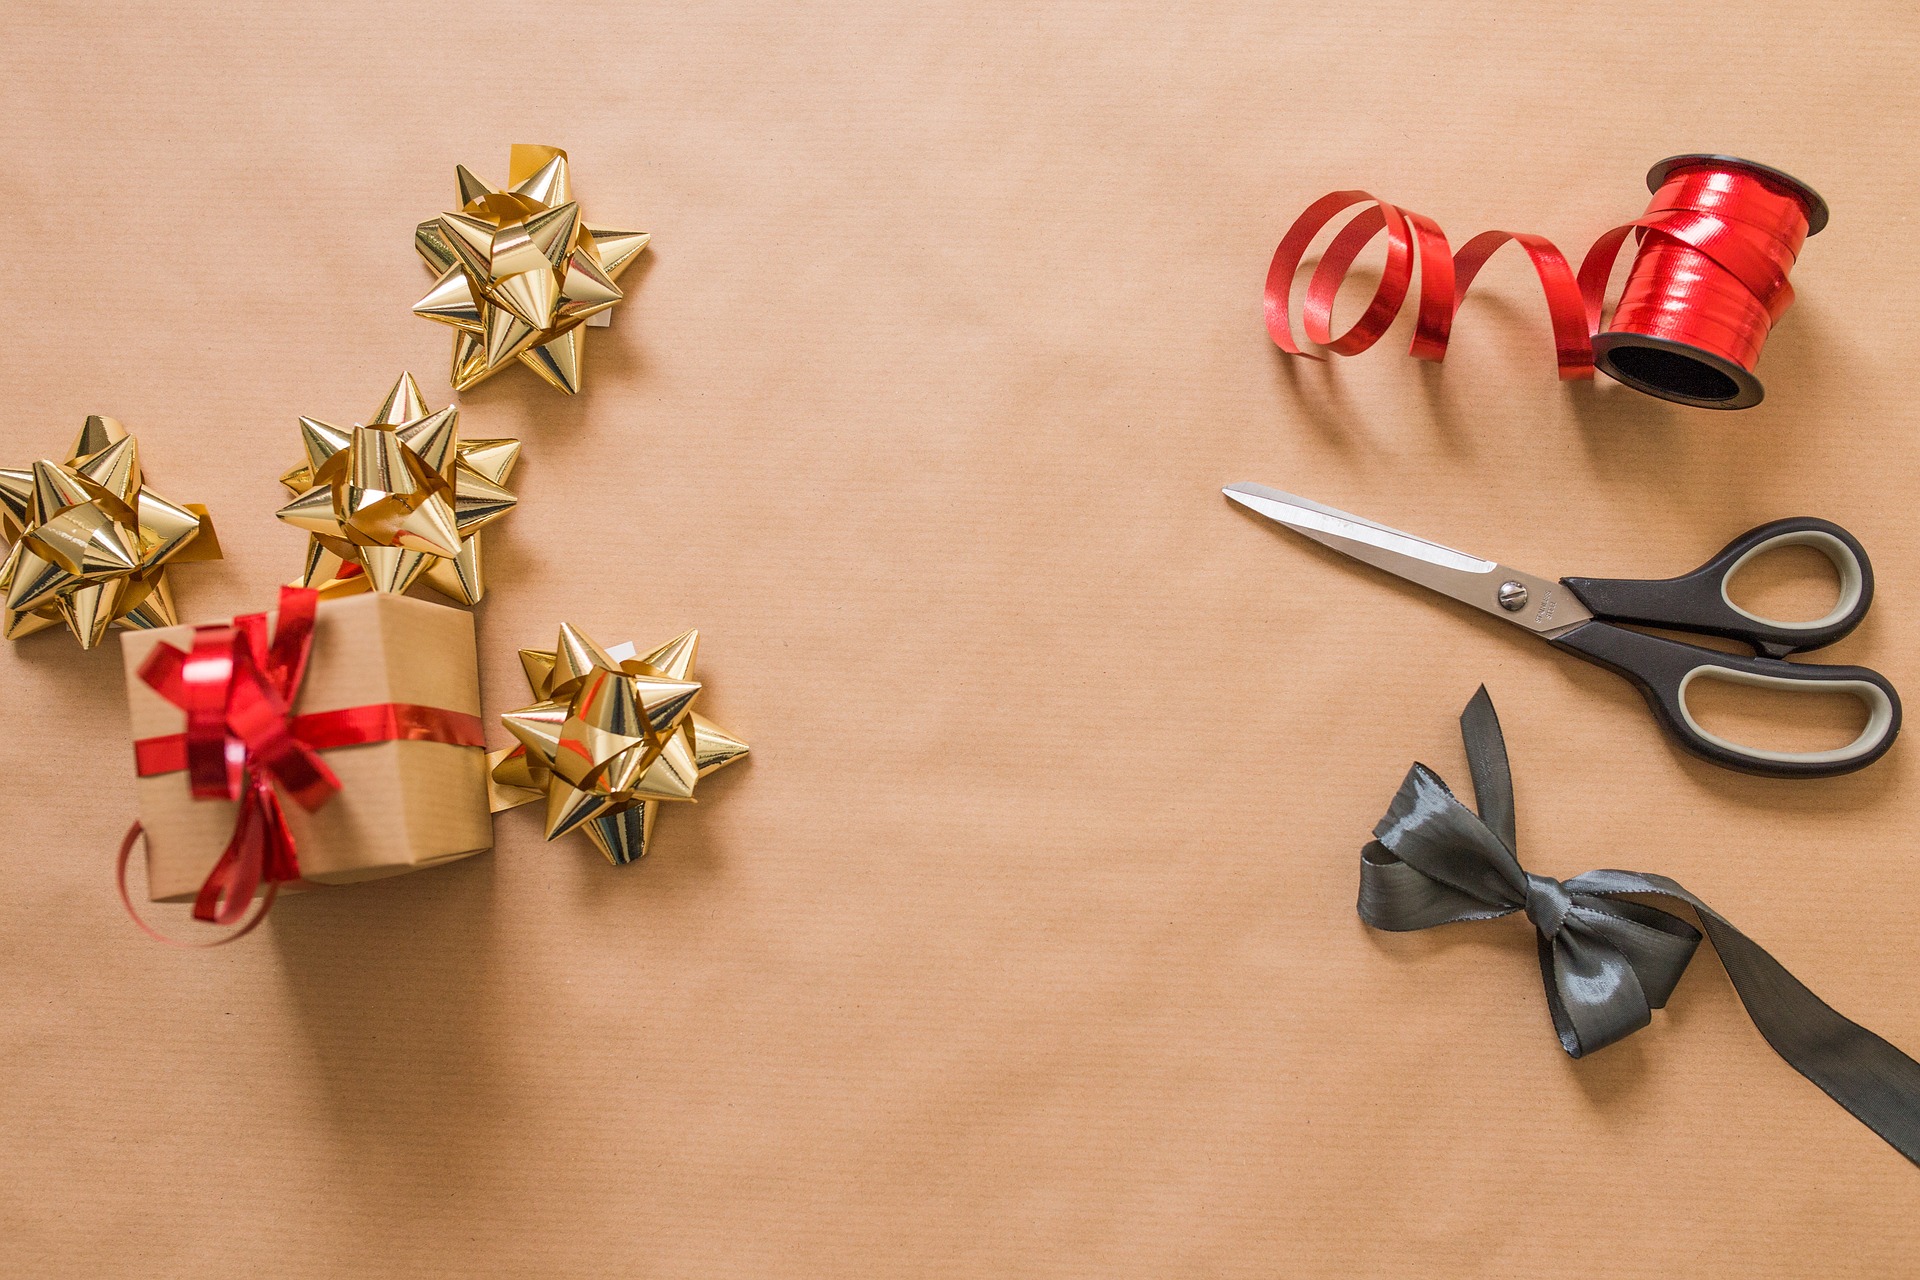 Image shows ribbons and bows for gifts. 